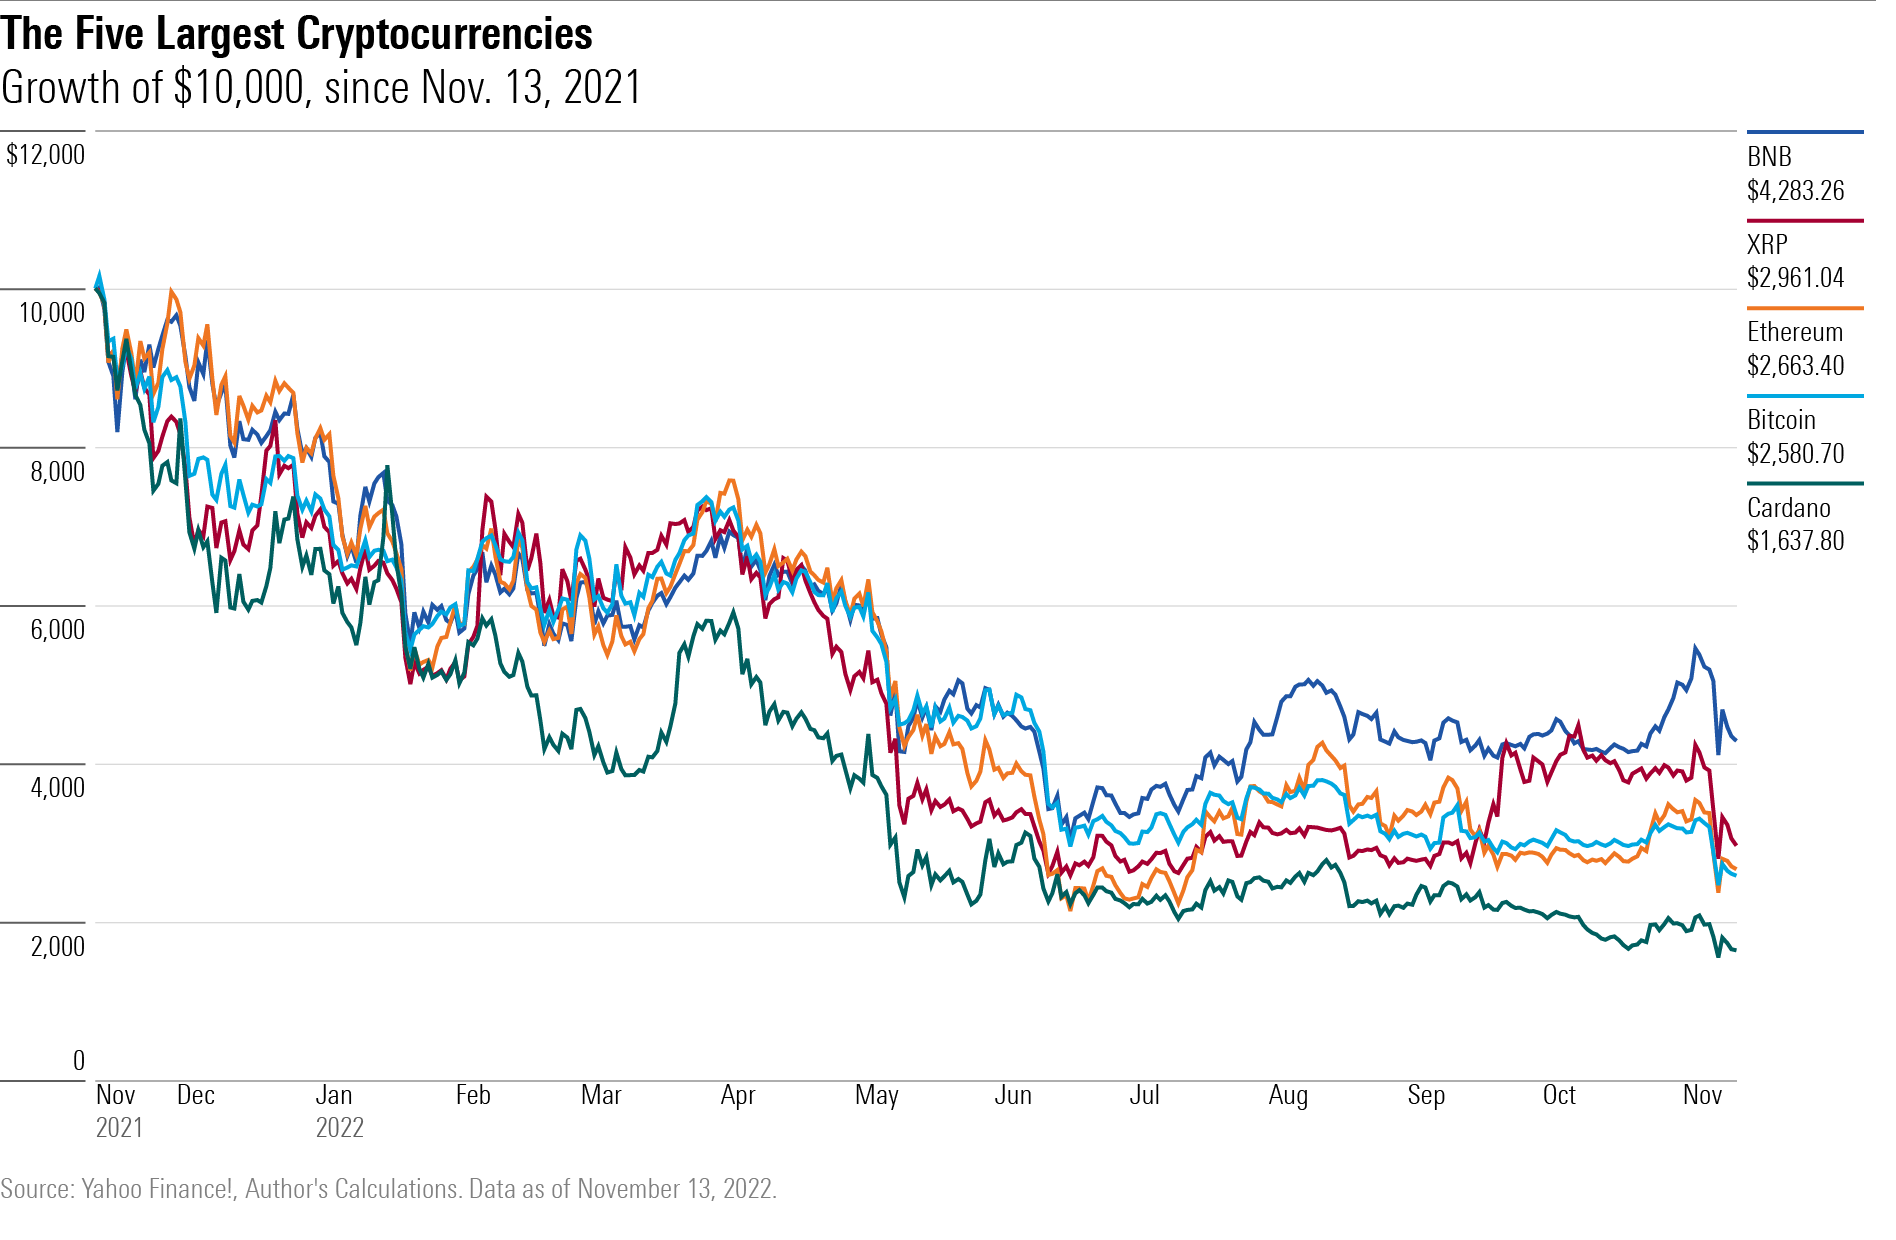 The growth of $10,000 for the five largest cryptocurrencies, from November 13, 2021 through November 11, 2022.